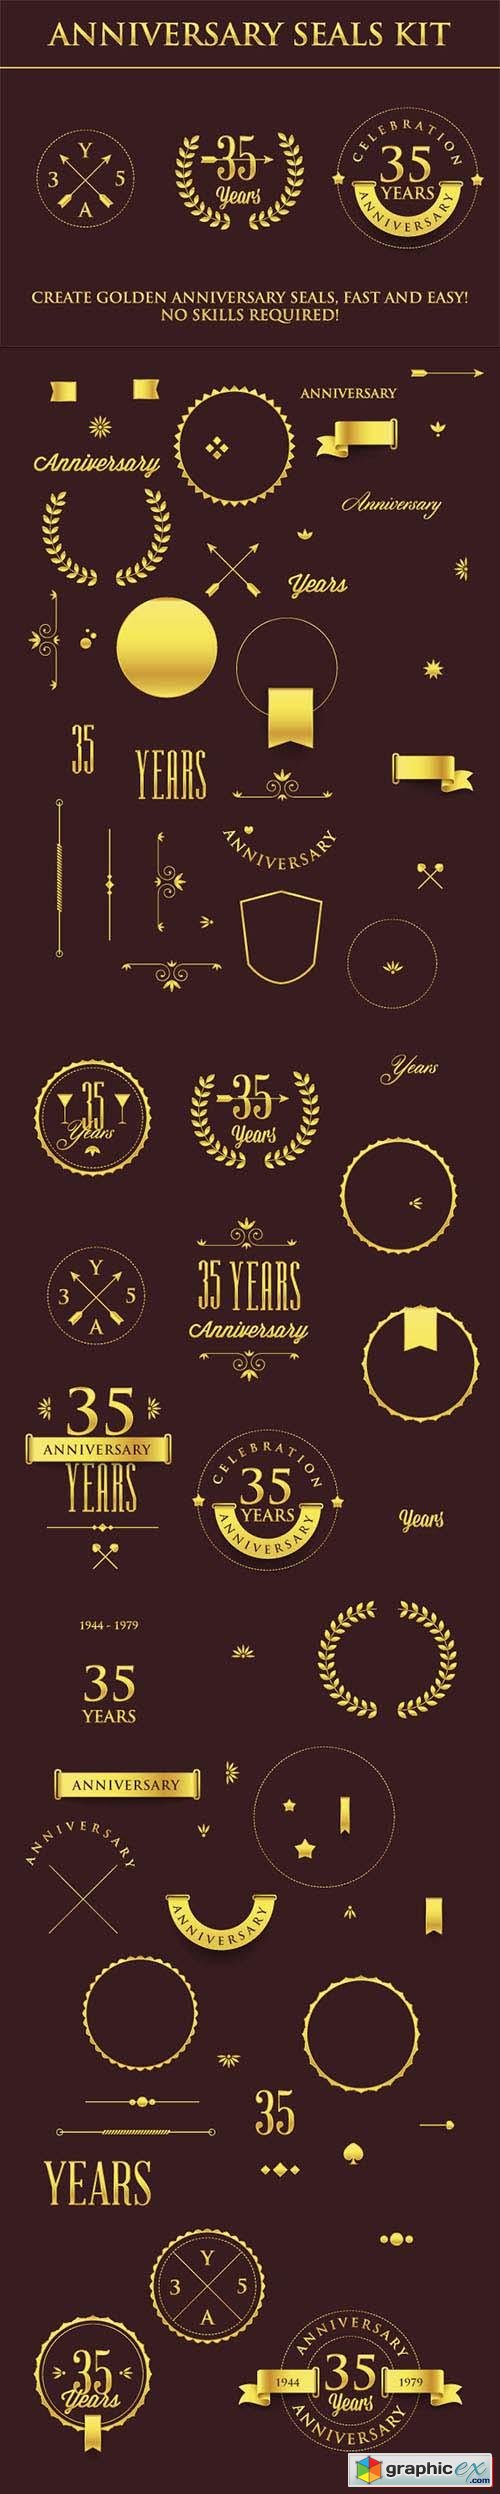  Designtnt - Anniversary Sign Collection 